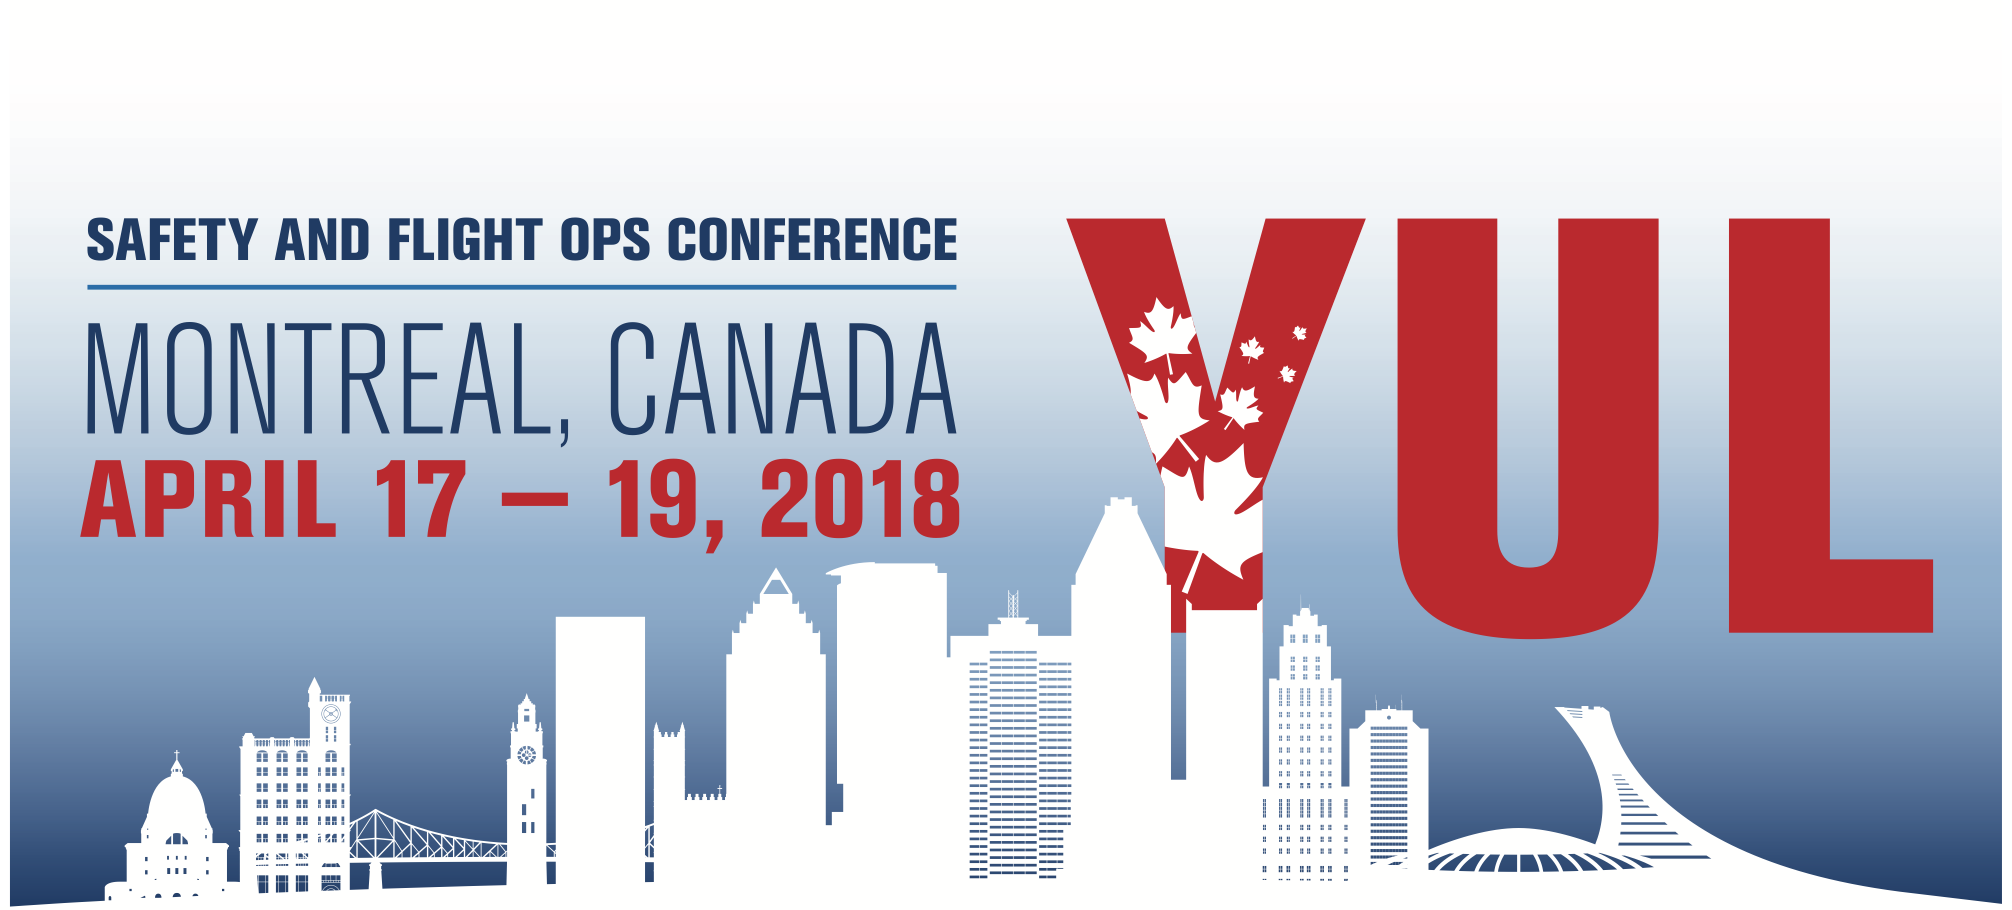 Safety and Flight Ops Conference Looks at Technology-Driven Change